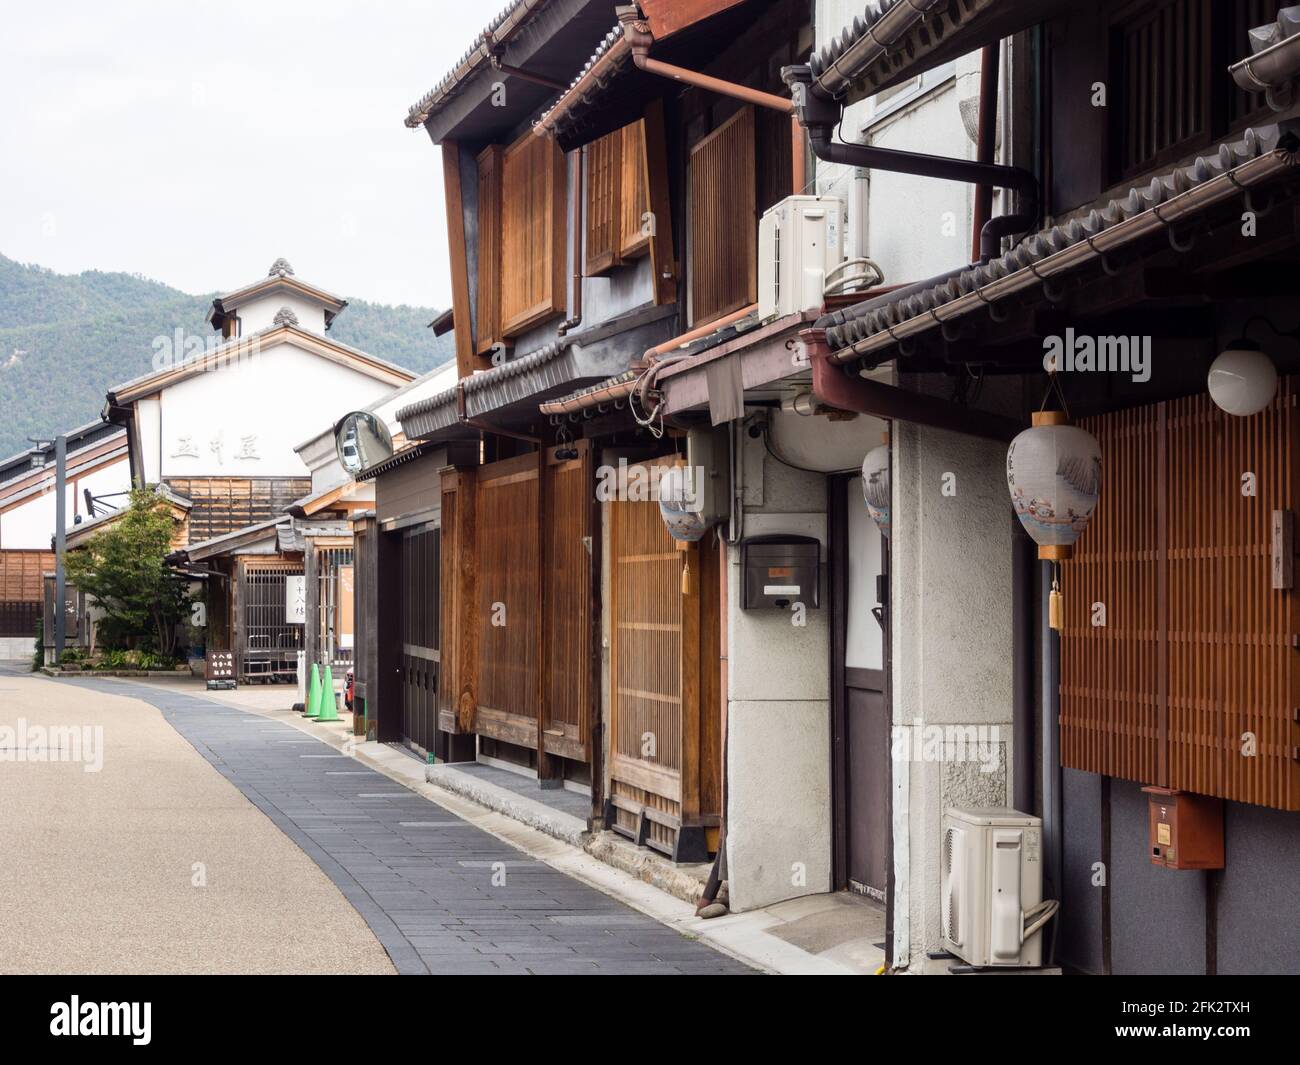 Gifu, Japan - October 5, 2015: Kawaramachi, an old street with traditional merchant houses - cafes and souvenir stores inside Stock Photo